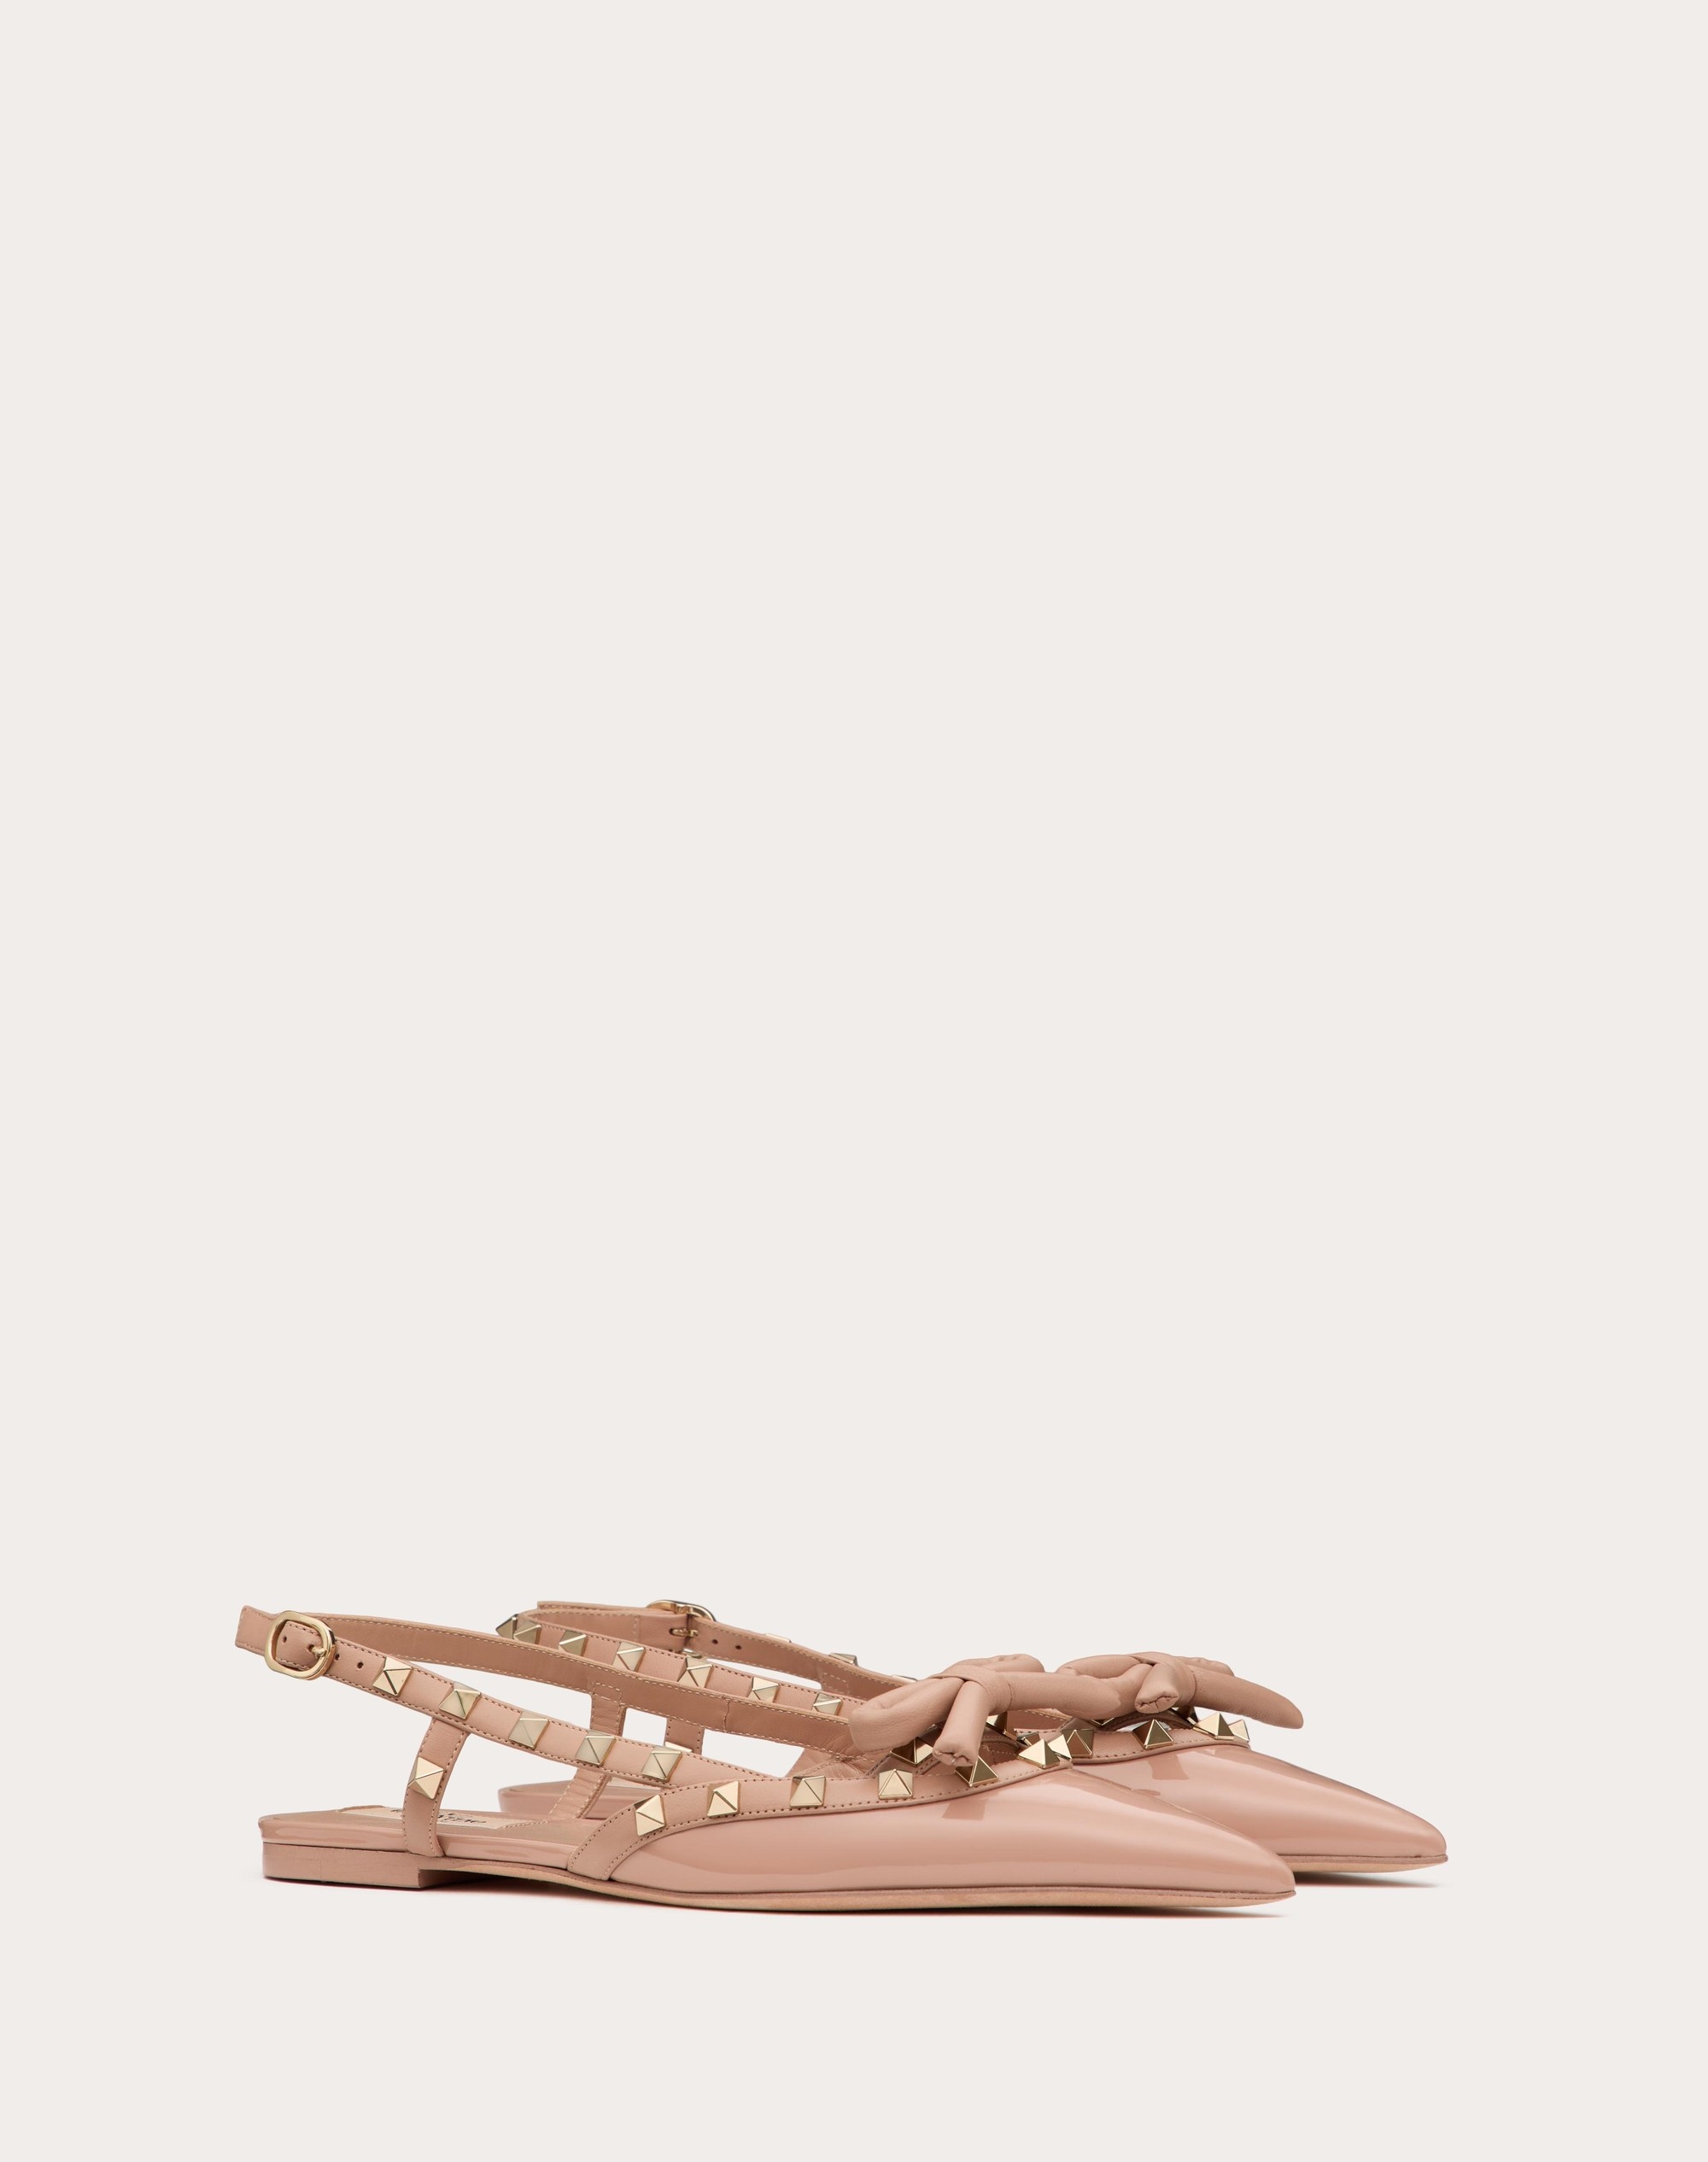 ROCKSTUD BOW SLINGBACK BALLERINAS IN PATENT LEATHER - 2